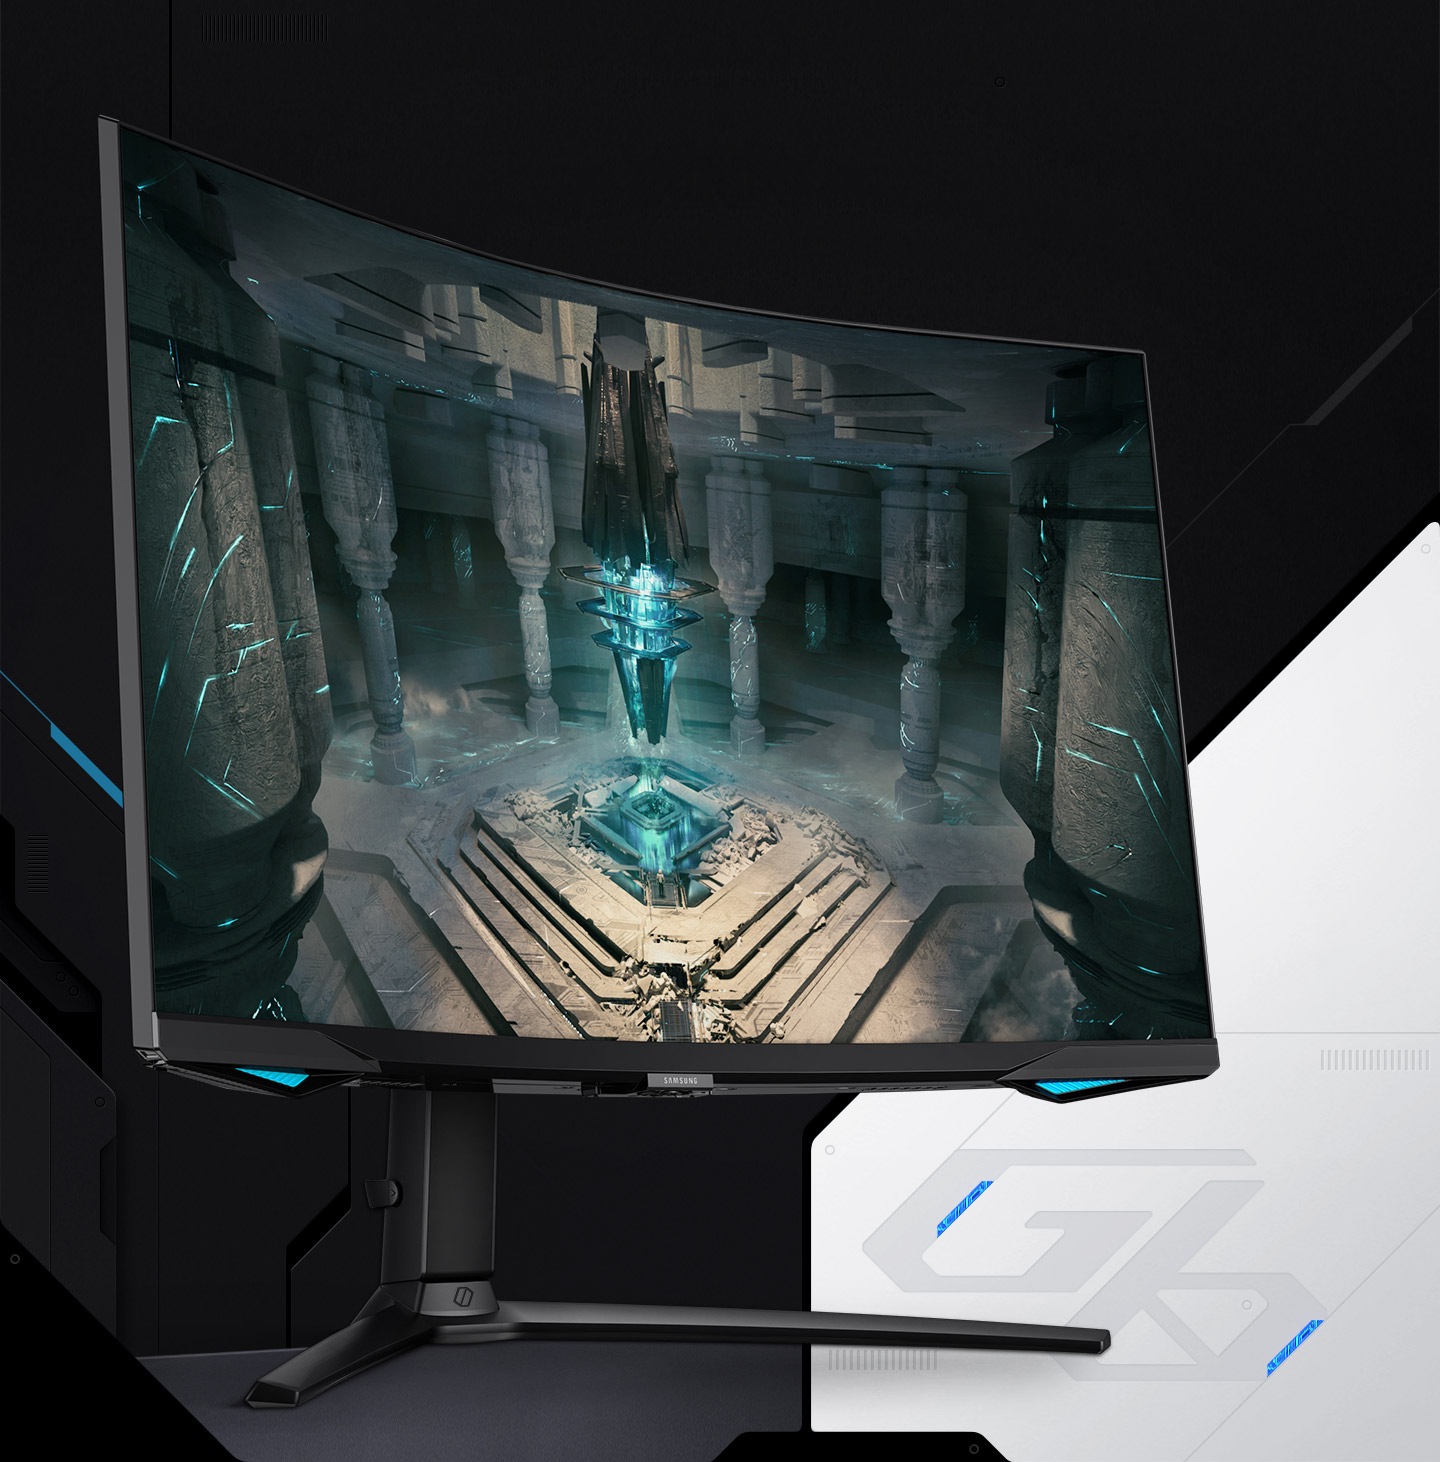 On the monitor display is a skyblue rocket ship with light emitting from its engine exhausts inside an underground cave. The rocket ship is set to launch out of the opening above, and surrounded by stone pillars and steps. "G6" logo is placed on the right side of the monitor stand.